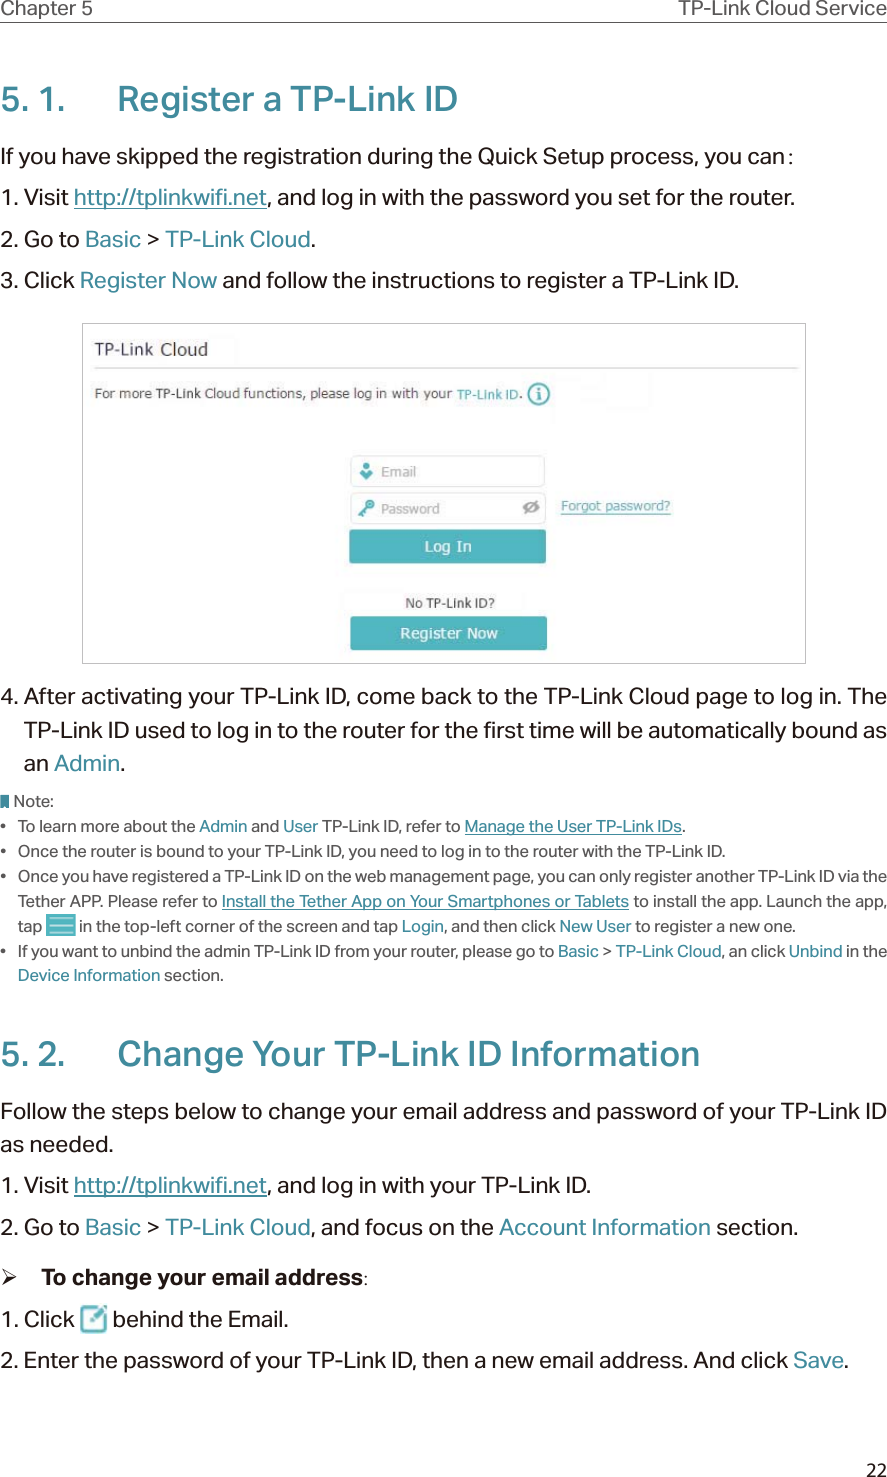 22Chapter 5 TP-Link Cloud Service5. 1.  Register a TP-Link IDIf you have skipped the registration during the Quick Setup process, you can：1. Visit http://tplinkwifi.net, and log in with the password you set for the router.2. Go to Basic &gt; TP-Link Cloud.3. Click Register Now and follow the instructions to register a TP-Link ID.4. After activating your TP-Link ID, come back to the TP-Link Cloud page to log in. The TP-Link ID used to log in to the router for the first time will be automatically bound as an Admin. Note:•  To learn more about the Admin and User TP-Link ID, refer to Manage the User TP-Link IDs.•  Once the router is bound to your TP-Link ID, you need to log in to the router with the TP-Link ID. •  Once you have registered a TP-Link ID on the web management page, you can only register another TP-Link ID via the Tether APP. Please refer to Install the Tether App on Your Smartphones or Tablets to install the app. Launch the app, tap   in the top-left corner of the screen and tap Login, and then click New User to register a new one.•  If you want to unbind the admin TP-Link ID from your router, please go to Basic &gt; TP-Link Cloud, an click Unbind in the Device Information section.5. 2.  Change Your TP-Link ID InformationFollow the steps below to change your email address and password of your TP-Link ID as needed.1. Visit http://tplinkwifi.net, and log in with your TP-Link ID.2. Go to Basic &gt; TP-Link Cloud, and focus on the Account Information section. ¾To change your email address:1. Click   behind the Email.2. Enter the password of your TP-Link ID, then a new email address. And click Save.